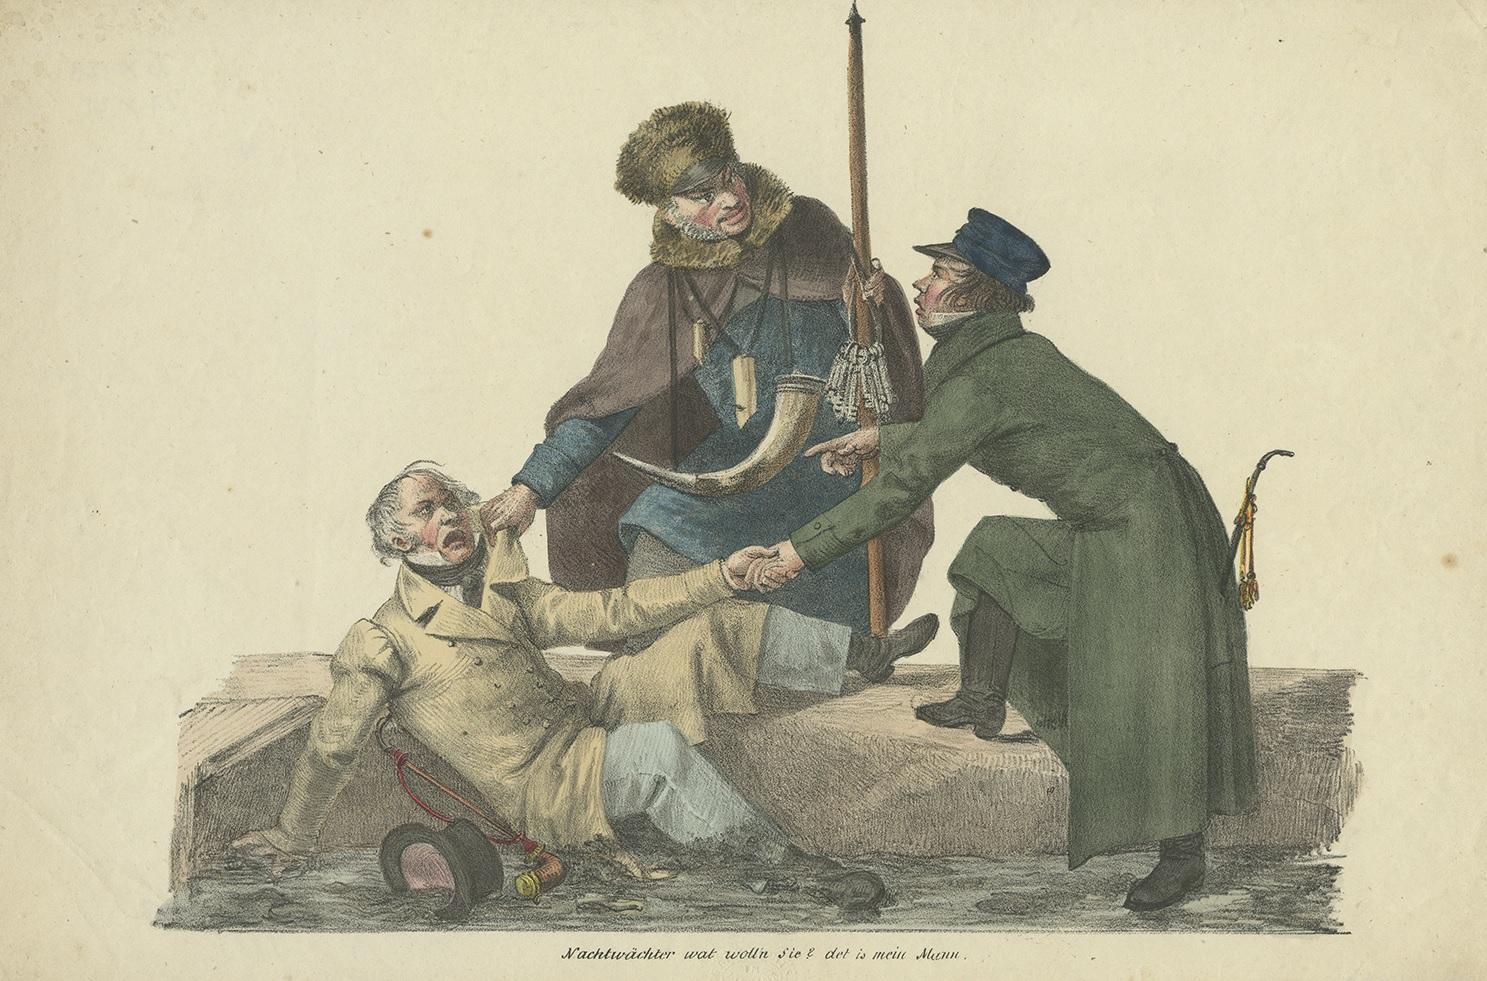 Antique print titled 'Nachtwächter wat woll'n Sie? Det is mein Mann'. Translated to English 'Watchman, what do you want? That is my Husband'. It shows a scene where a watchman taking a man by the collar and a woman trying to stop him. Source